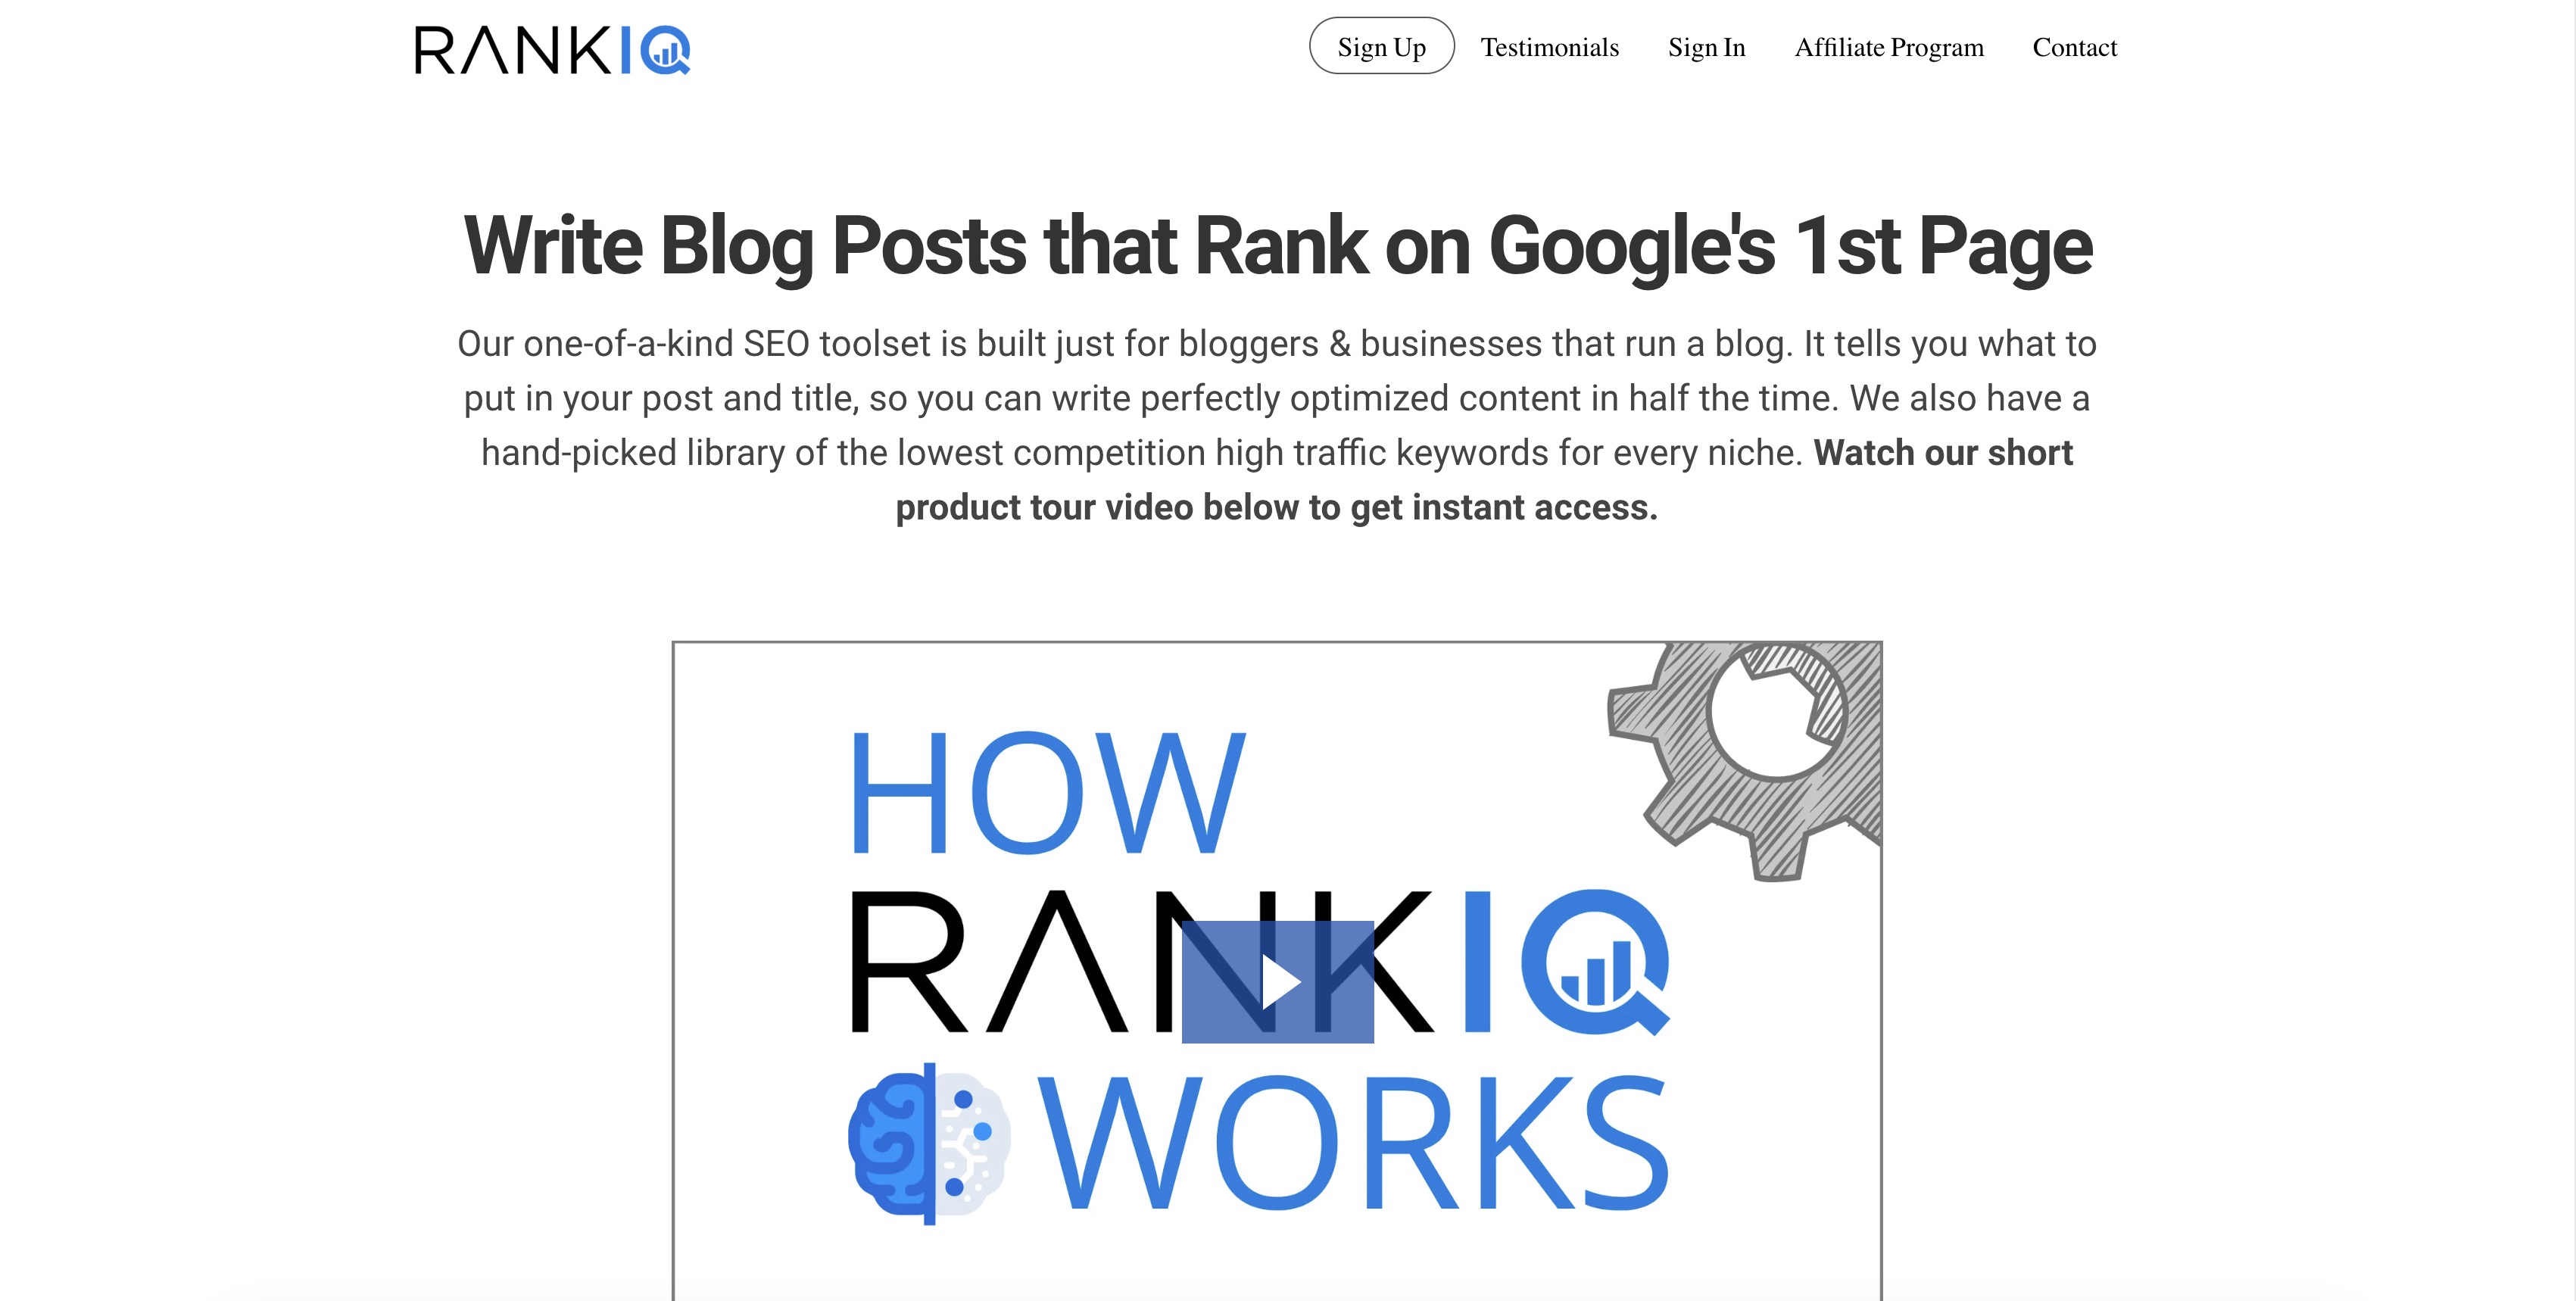 RankIQ review: a good SEO optimization tool for bloggers and small businesses